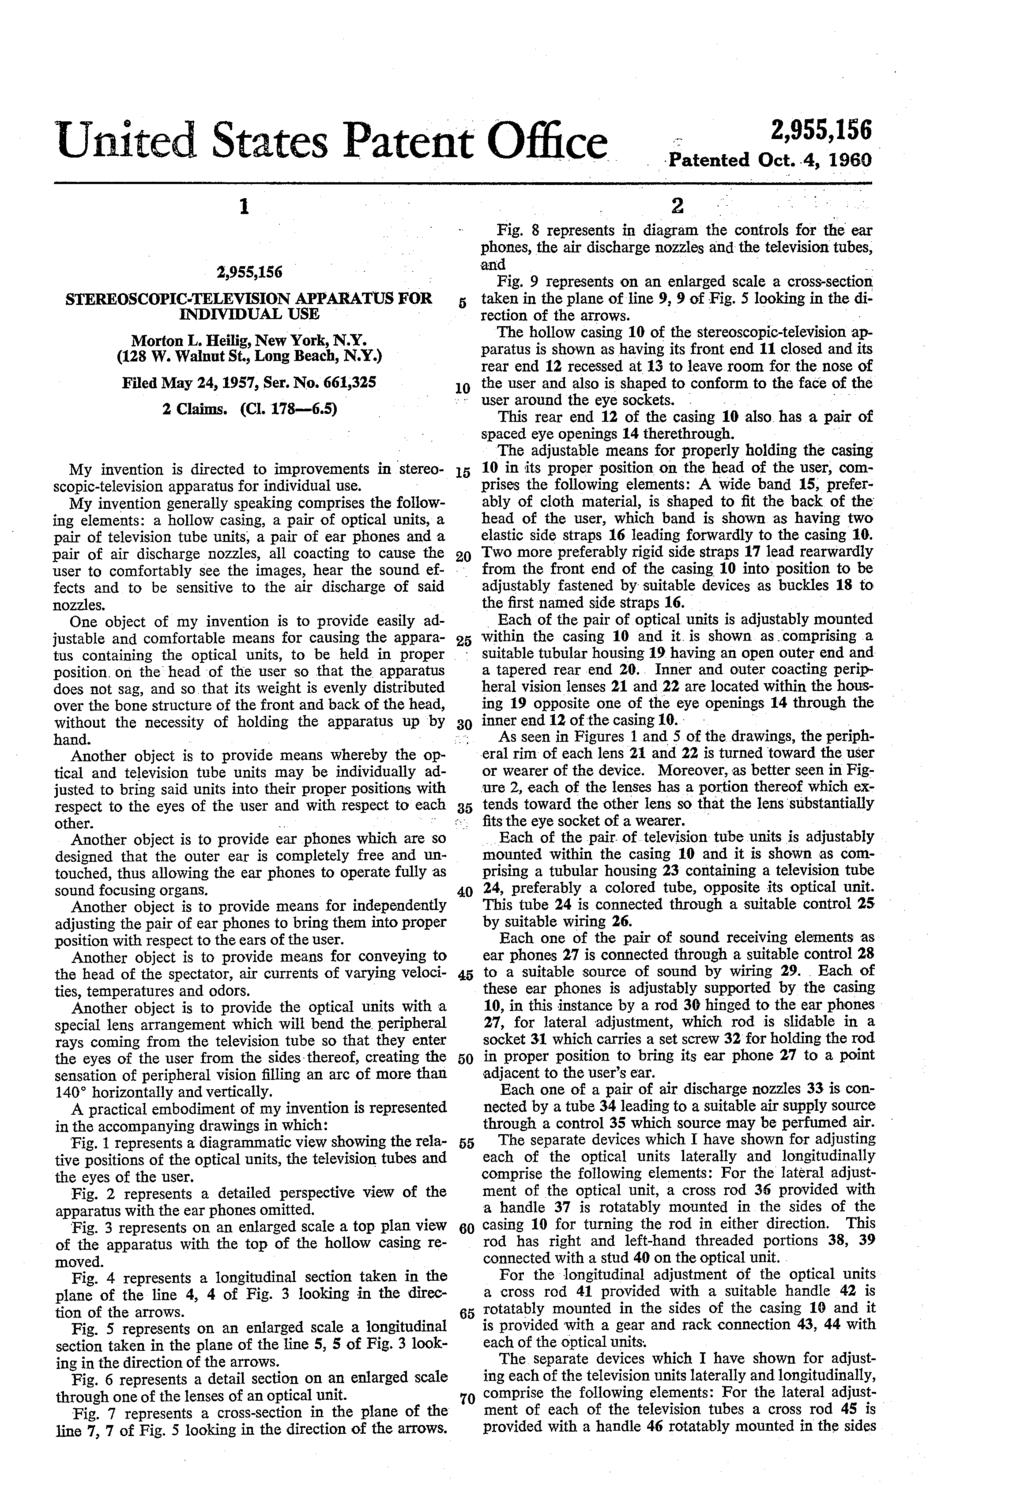 2,9,16 United States Patent Office Patented P. Oct. 4, 1960 1. 2,9,16 STEREOSCOPICTELEVISION APPARATUSFOR NDTV DUAL USE Morton L. Heilig, New York, N.Y. (128 W. Walnut St. Long Beach, N.Y.) Filed May 24, 197, Ser.